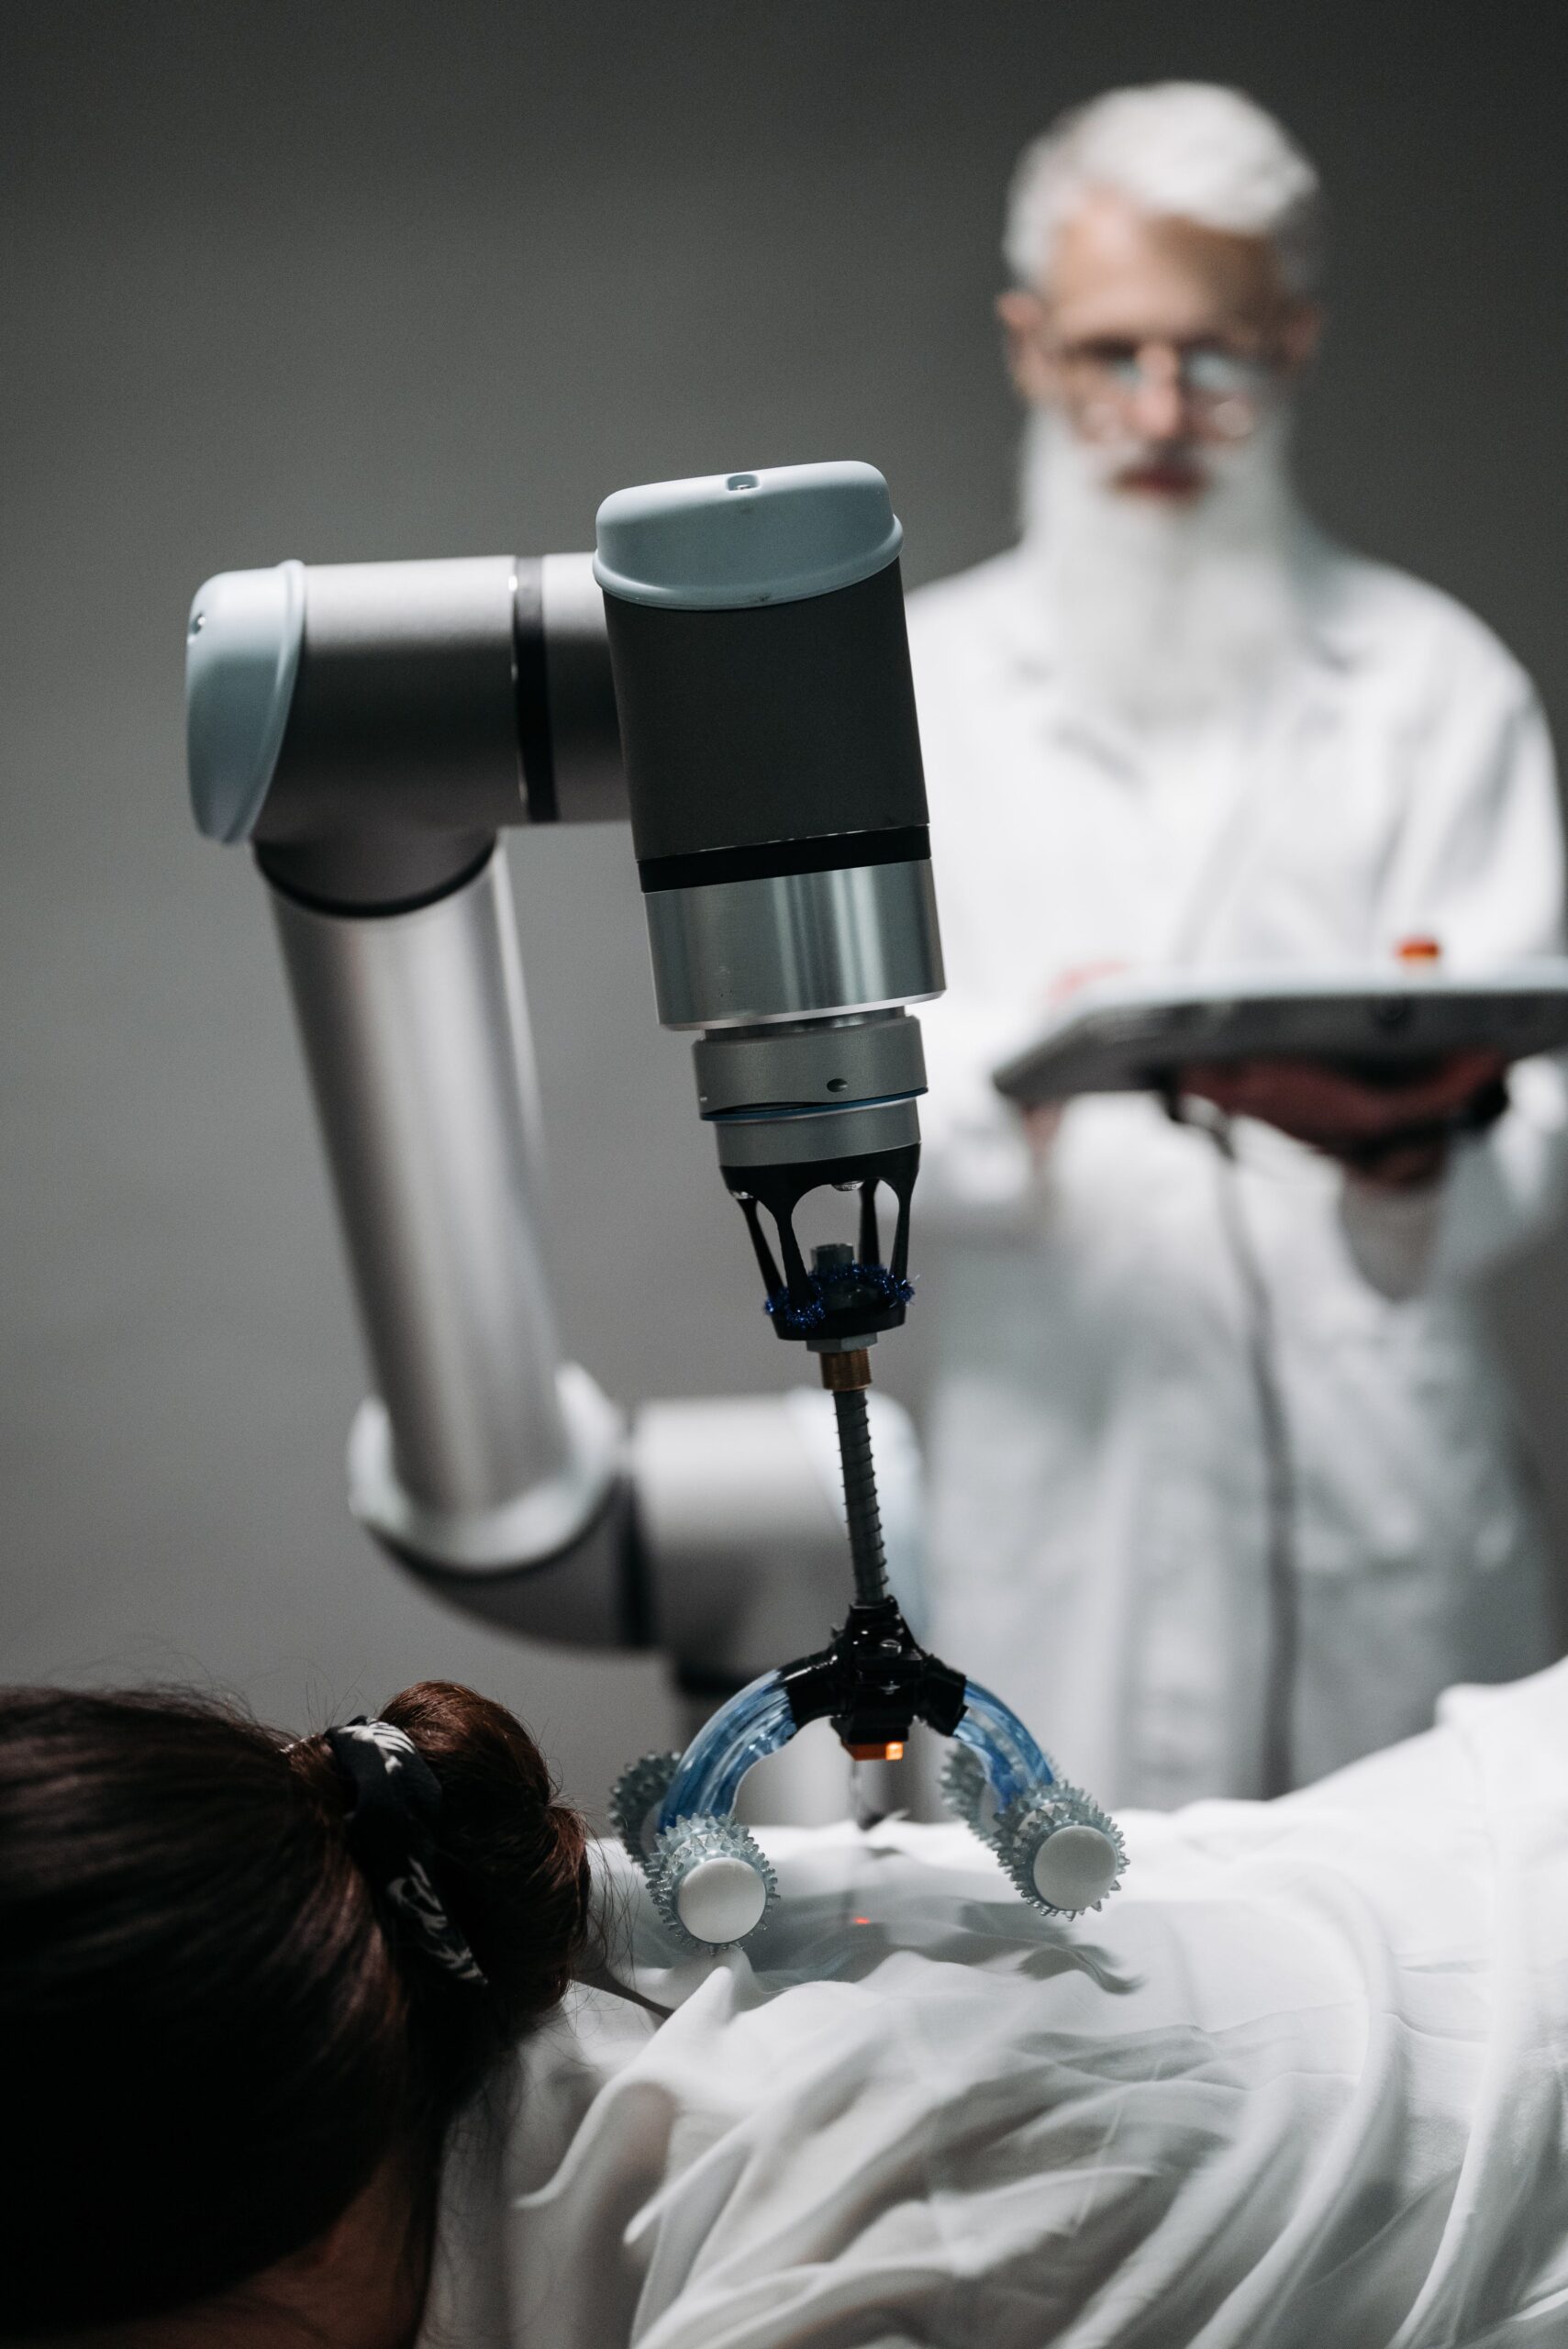 Articulated Robots in Health care